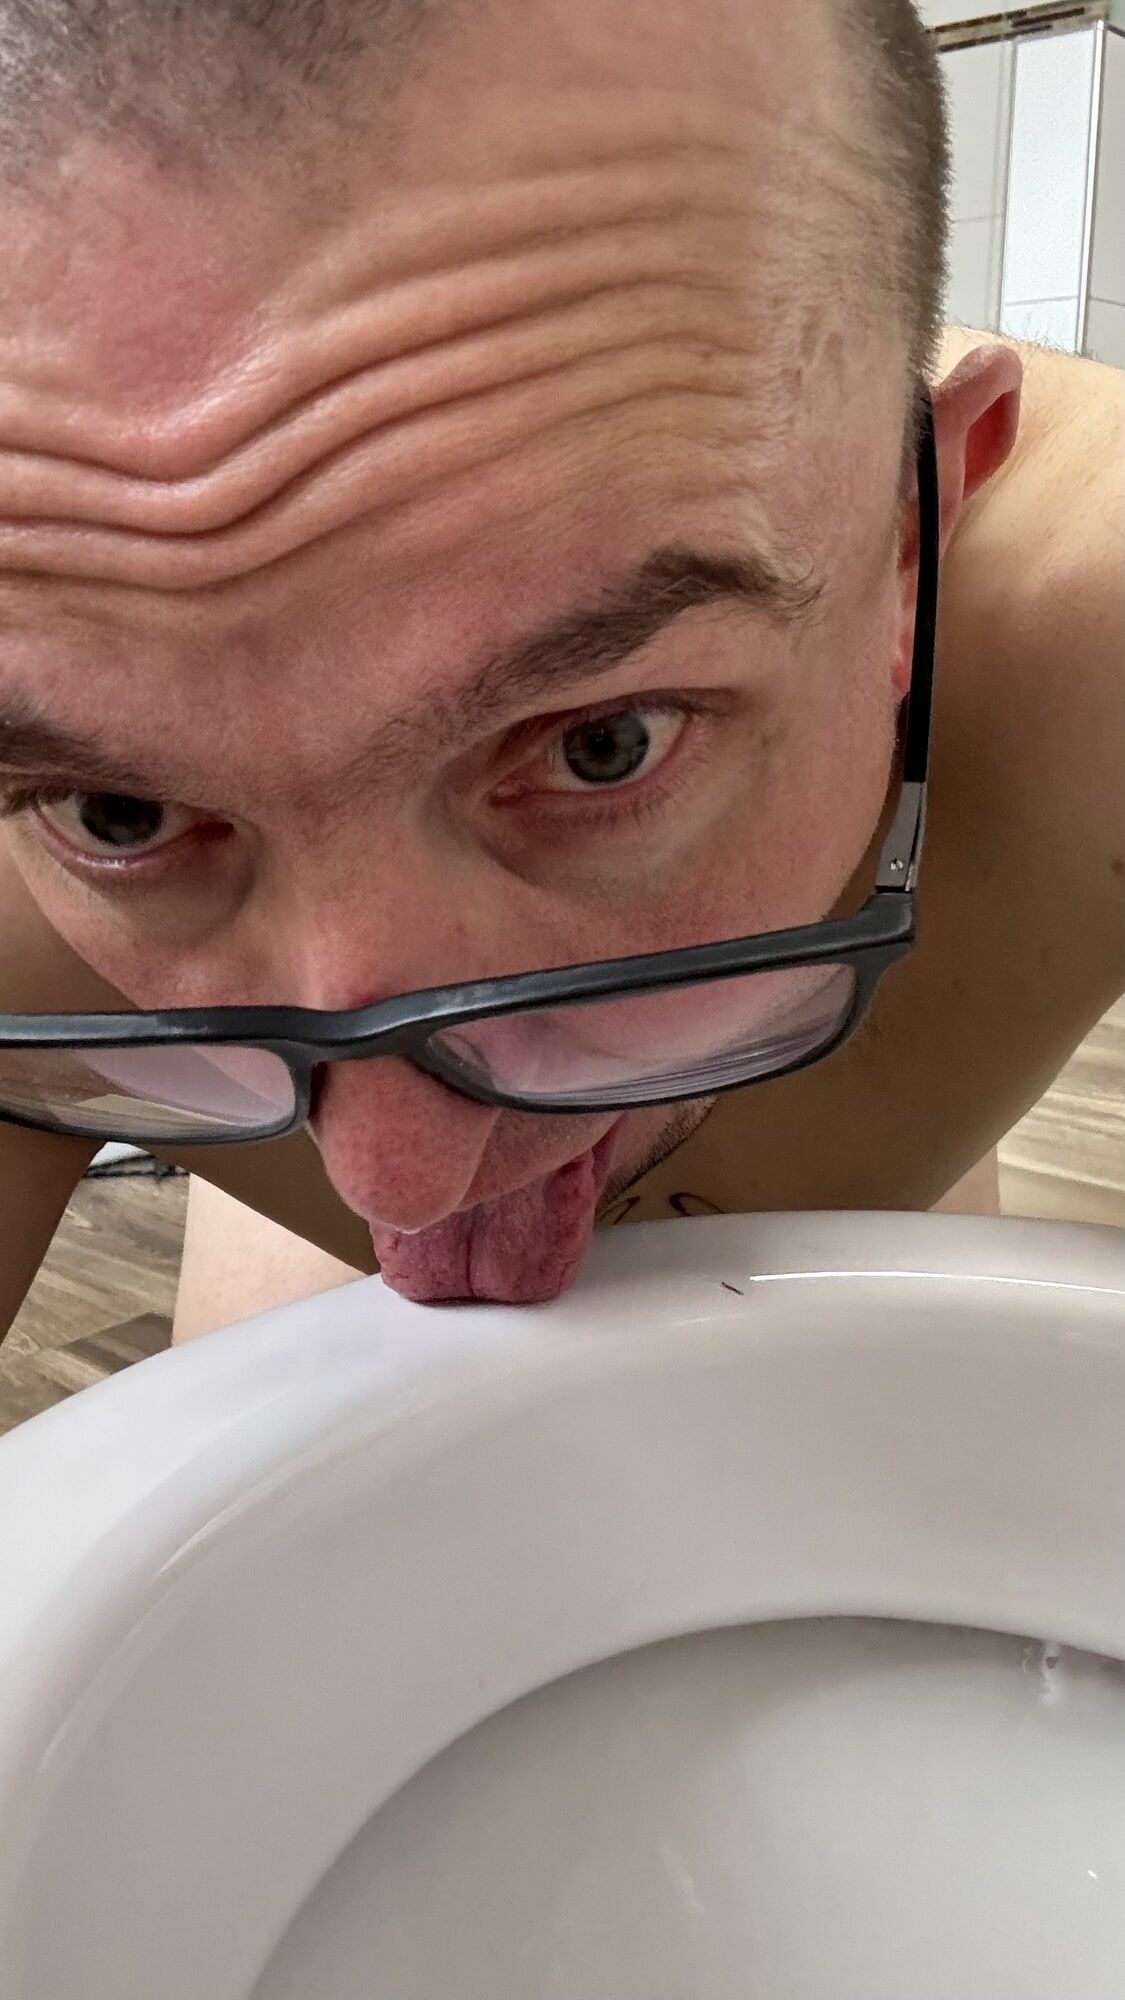 Slave pig has to clean toilet with his tongue